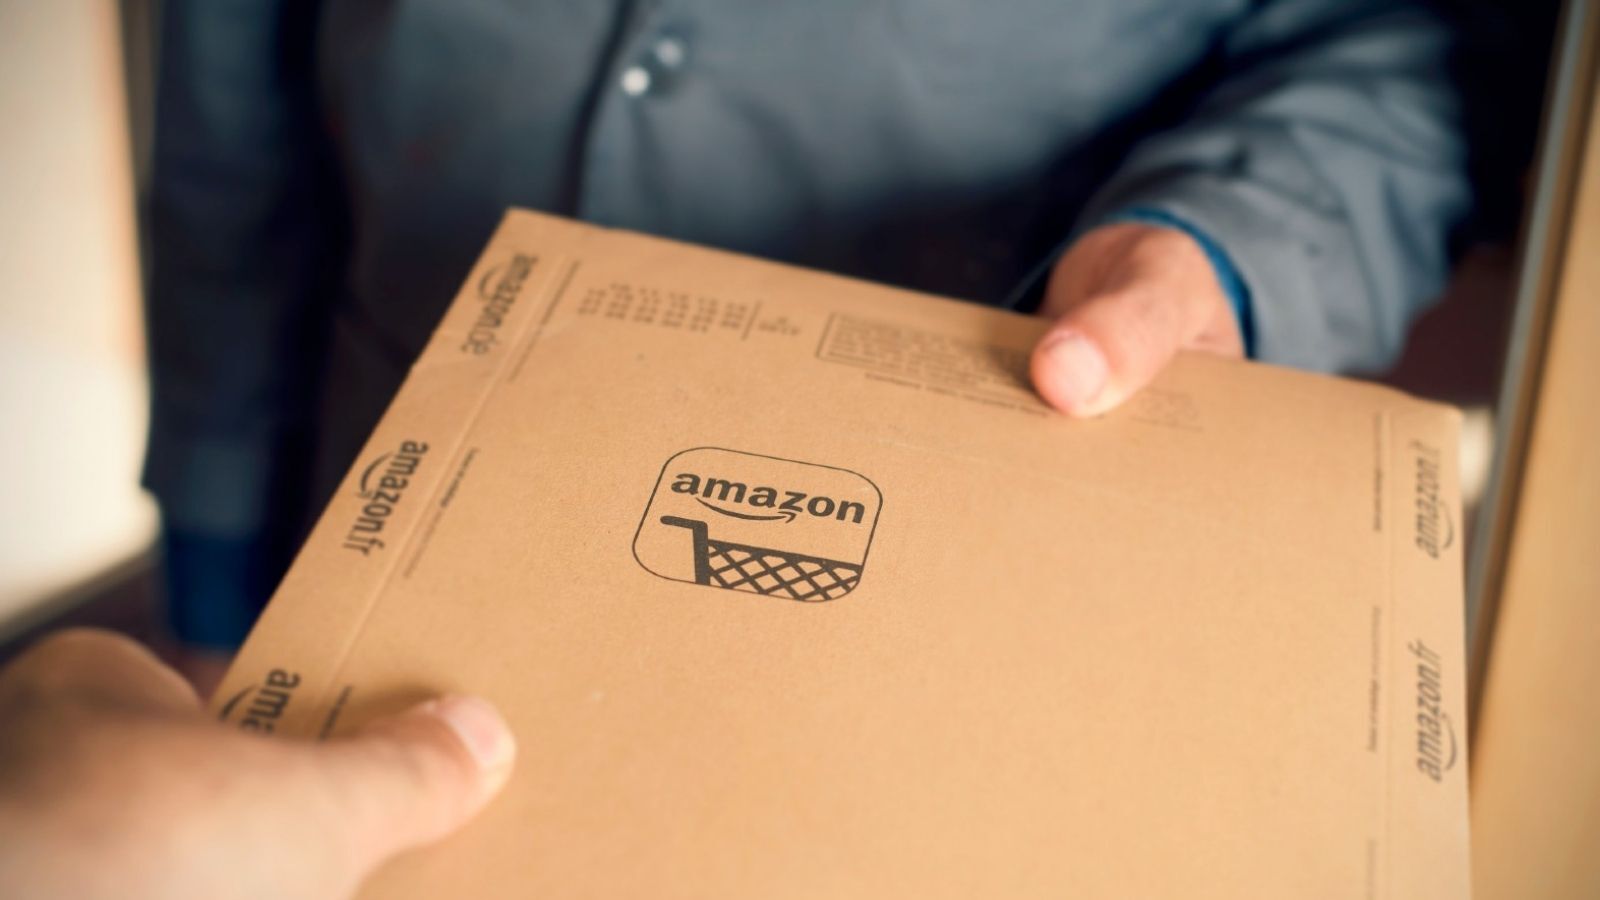 What Happens If I Get Someone Else's Amazon Package? (You Must Know This!)